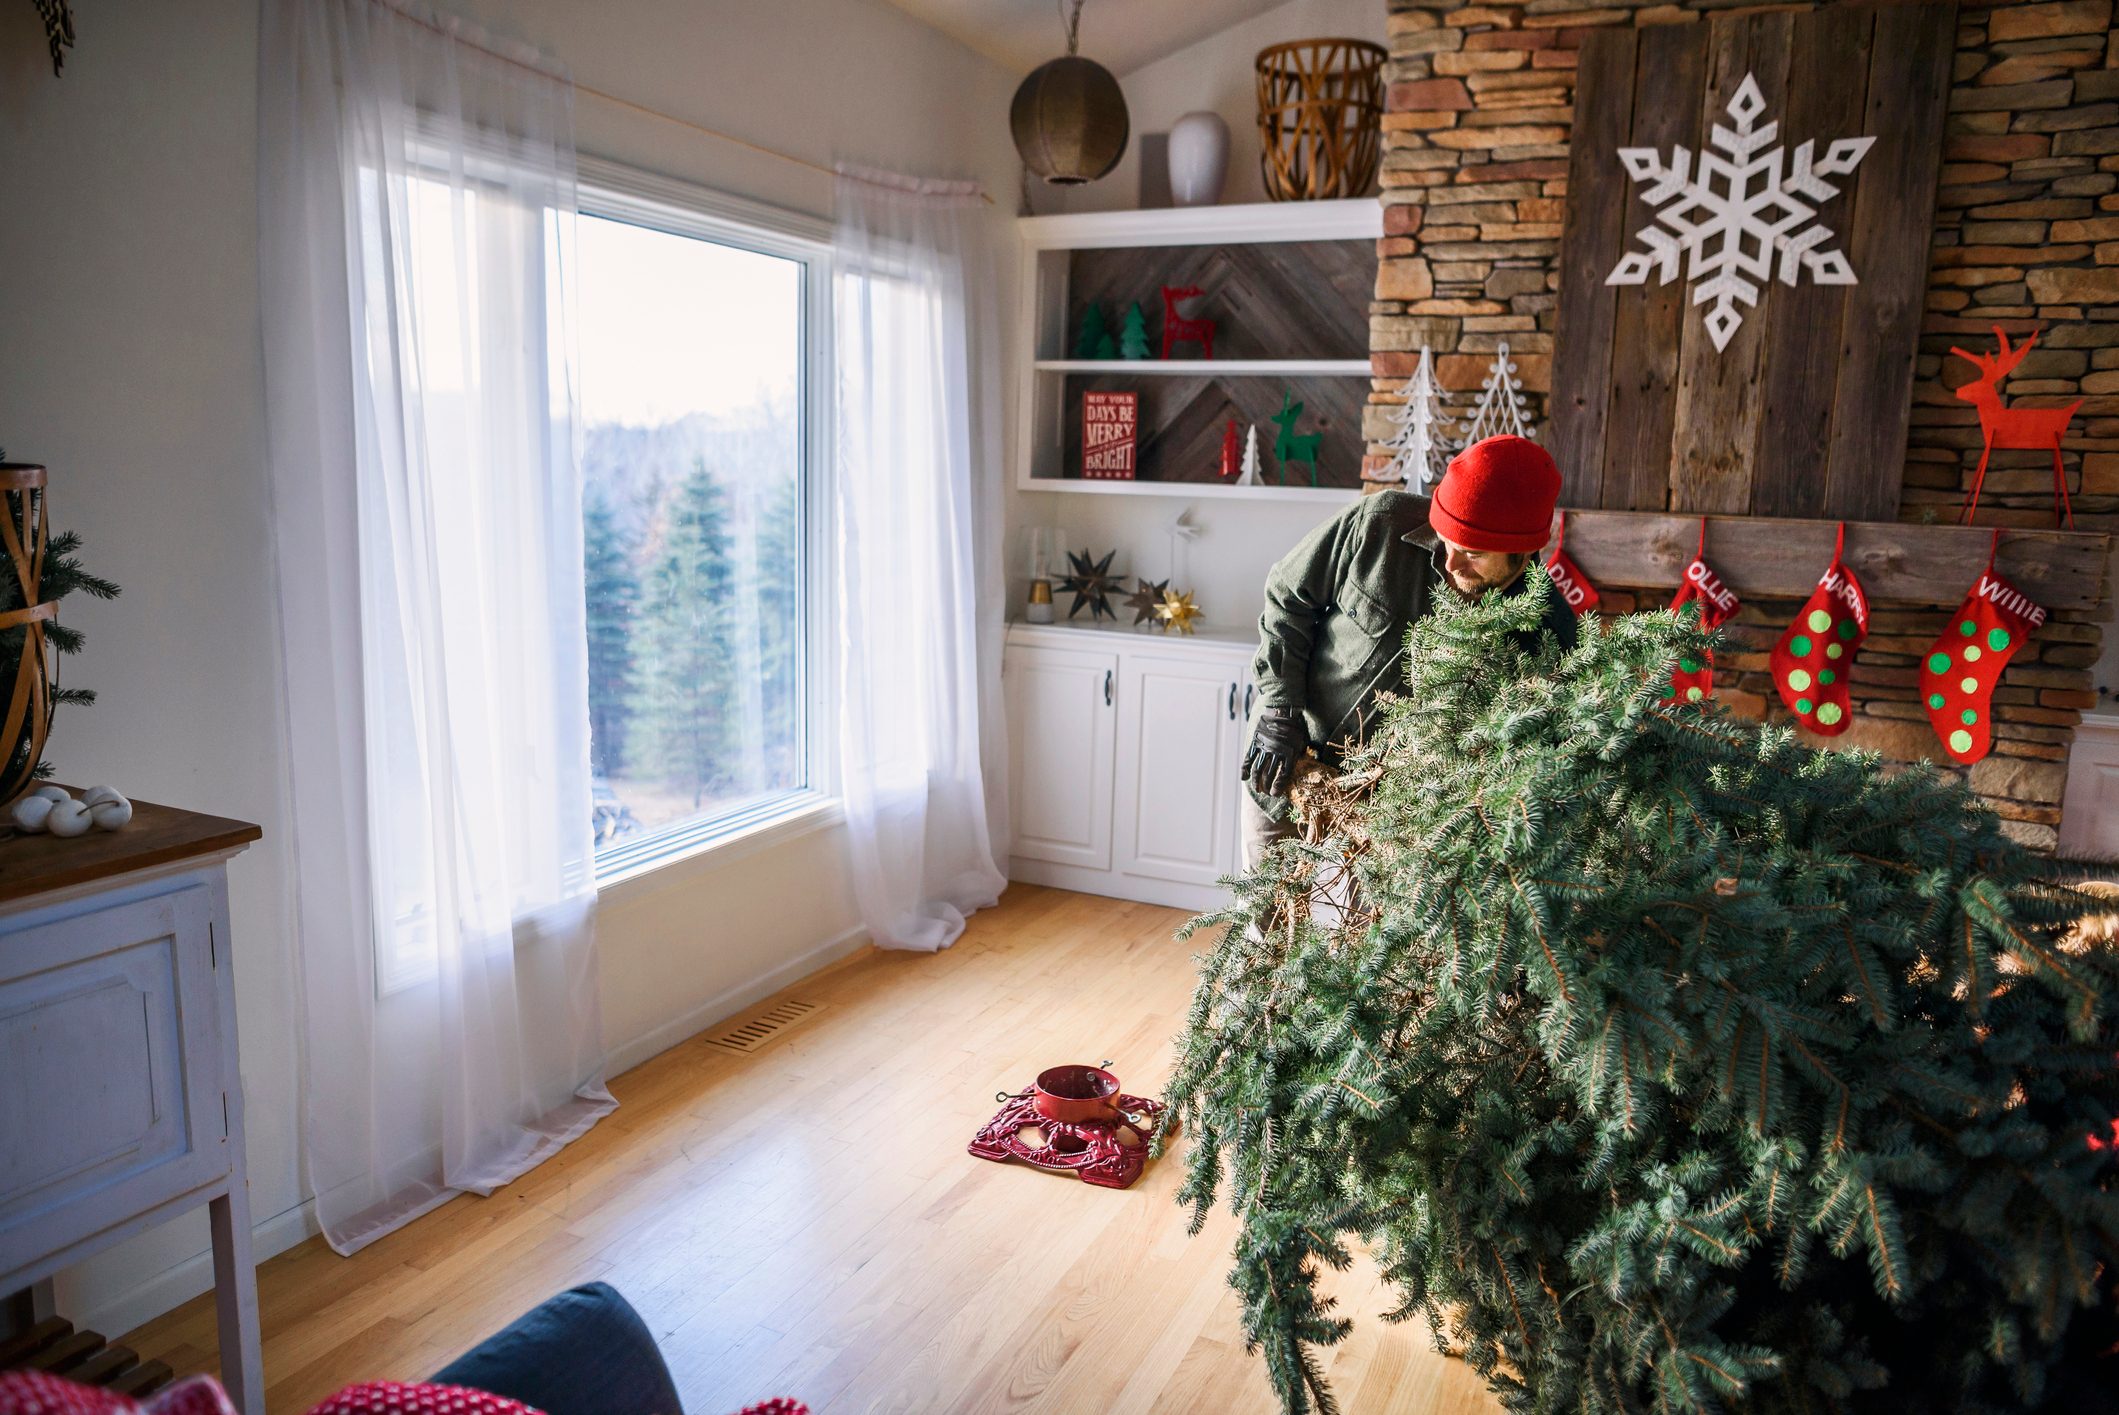 Man setting up a Christmas tree in the living room